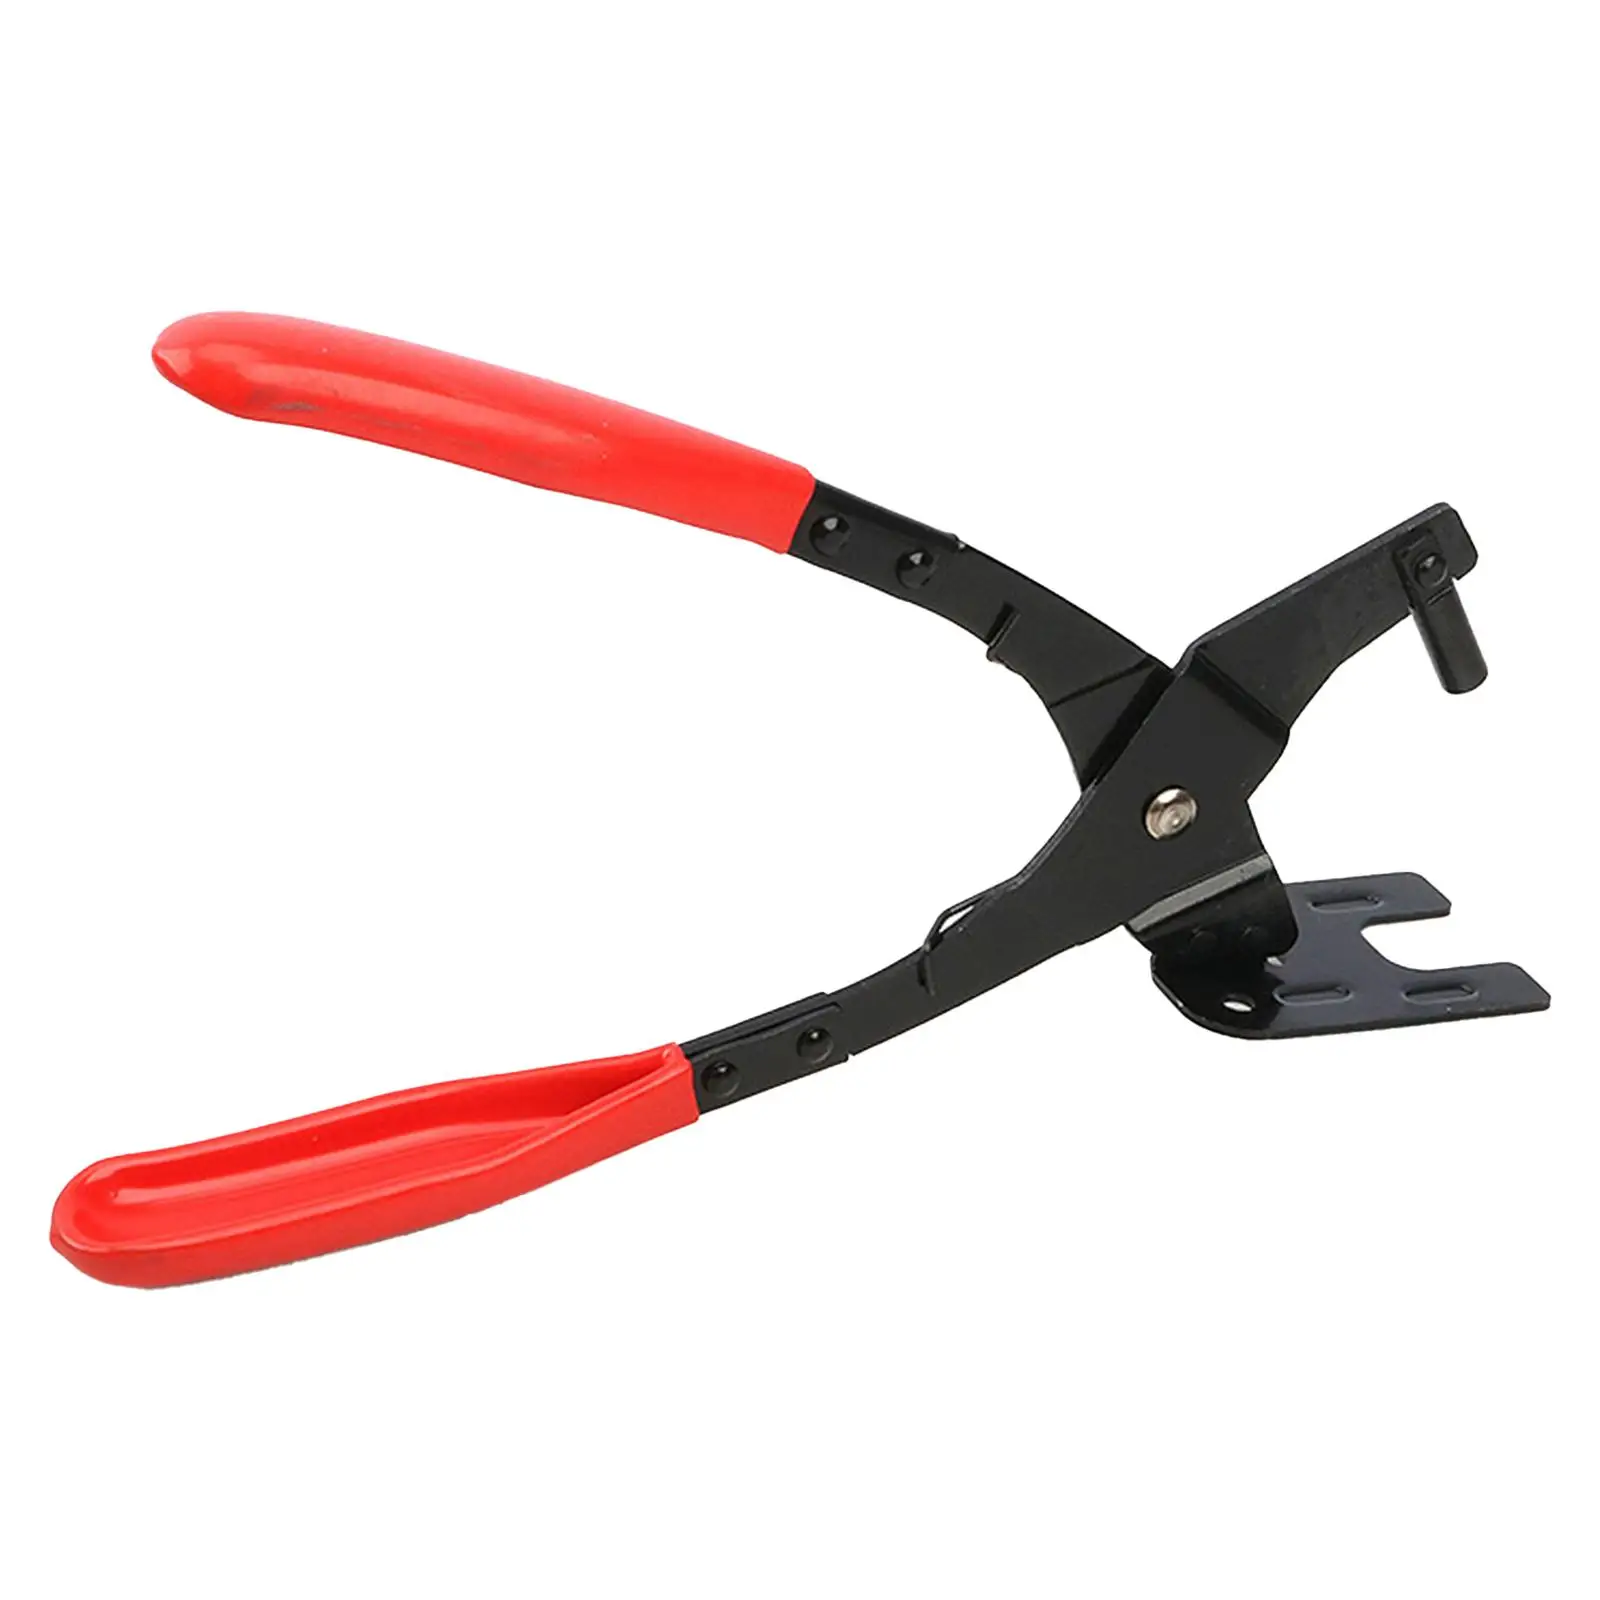 Exhaust Hanger Removal Pliers, 25 Degree Offset Handles, Exhaust Hanger Removal